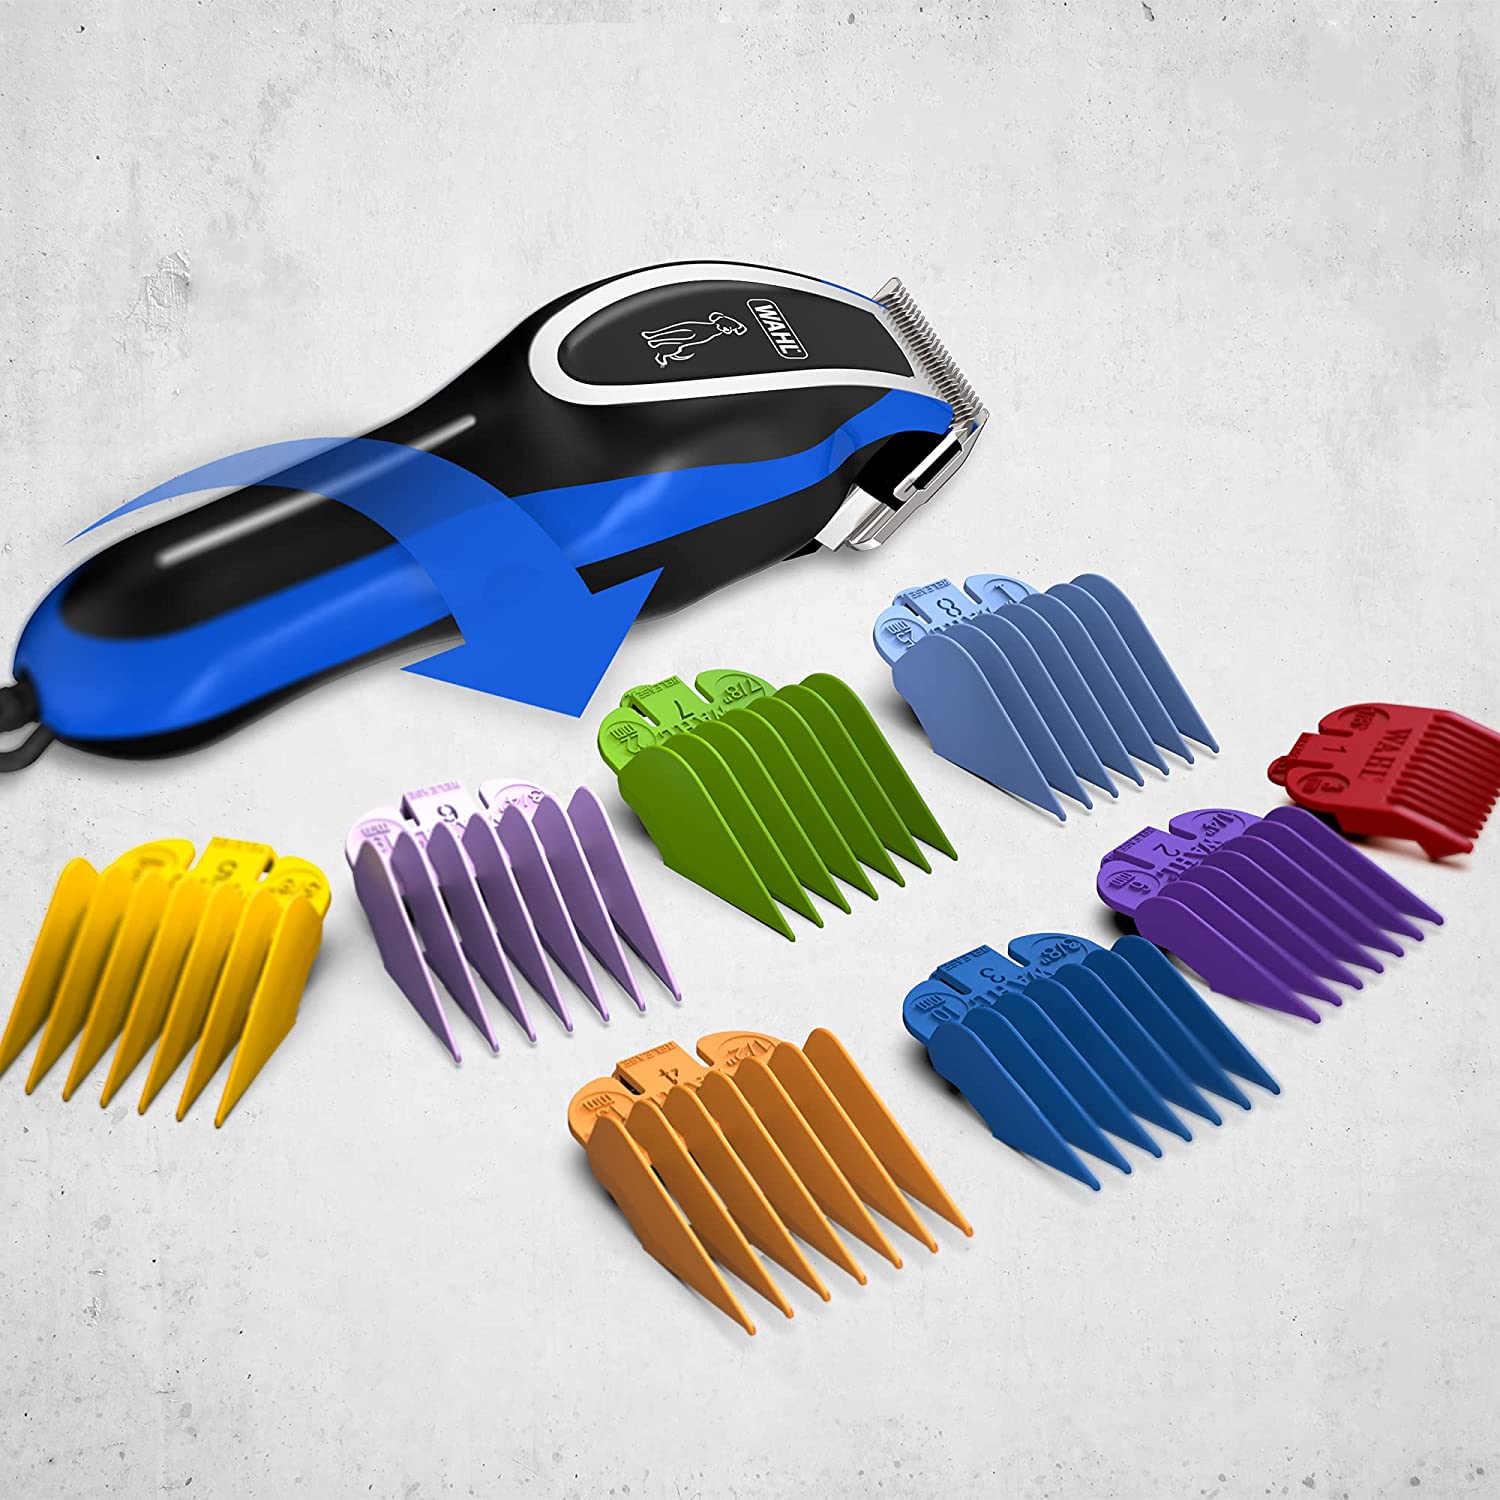 Wahl Pet Clippers, U-Clip Dog Grooming Kit with Colour Coded Combs, Low Noise Corded Pet Clippers, Sharp Cutting Steel Blades